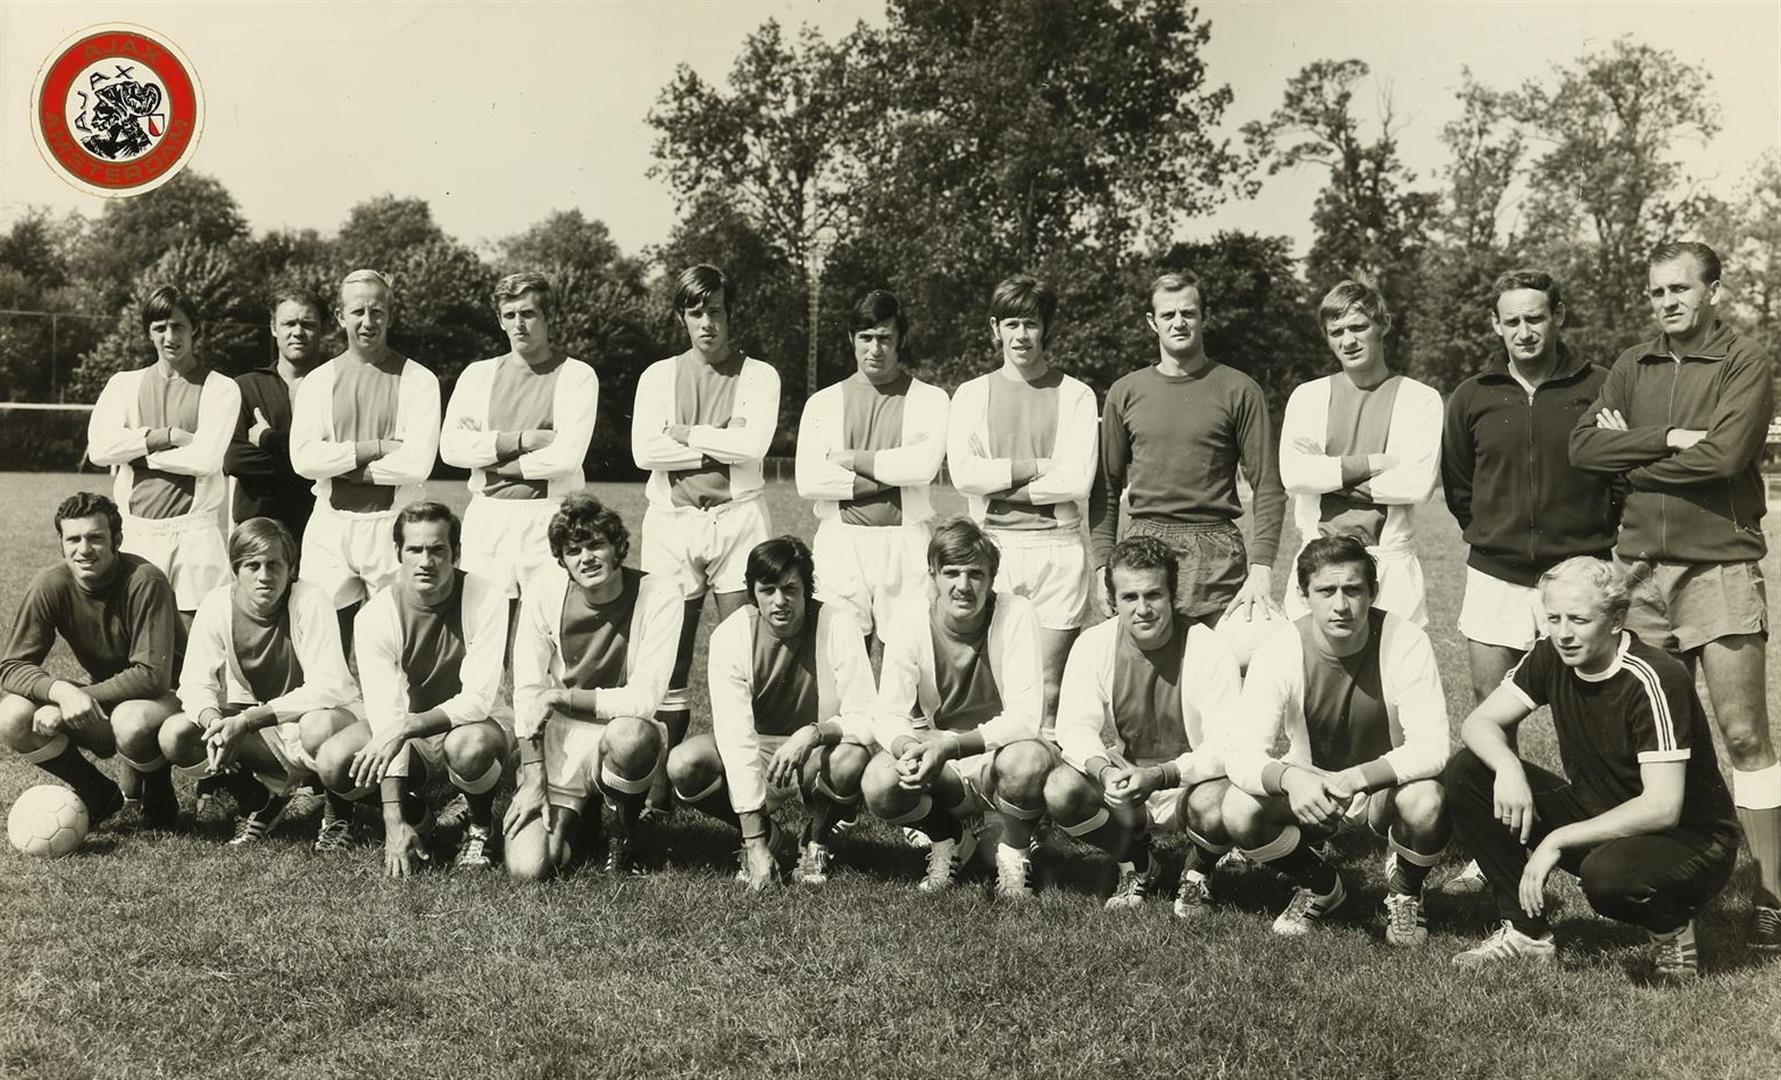 Team photo Ajax selection probably early 1970s, silver gelatin print 24 x 38 cm.